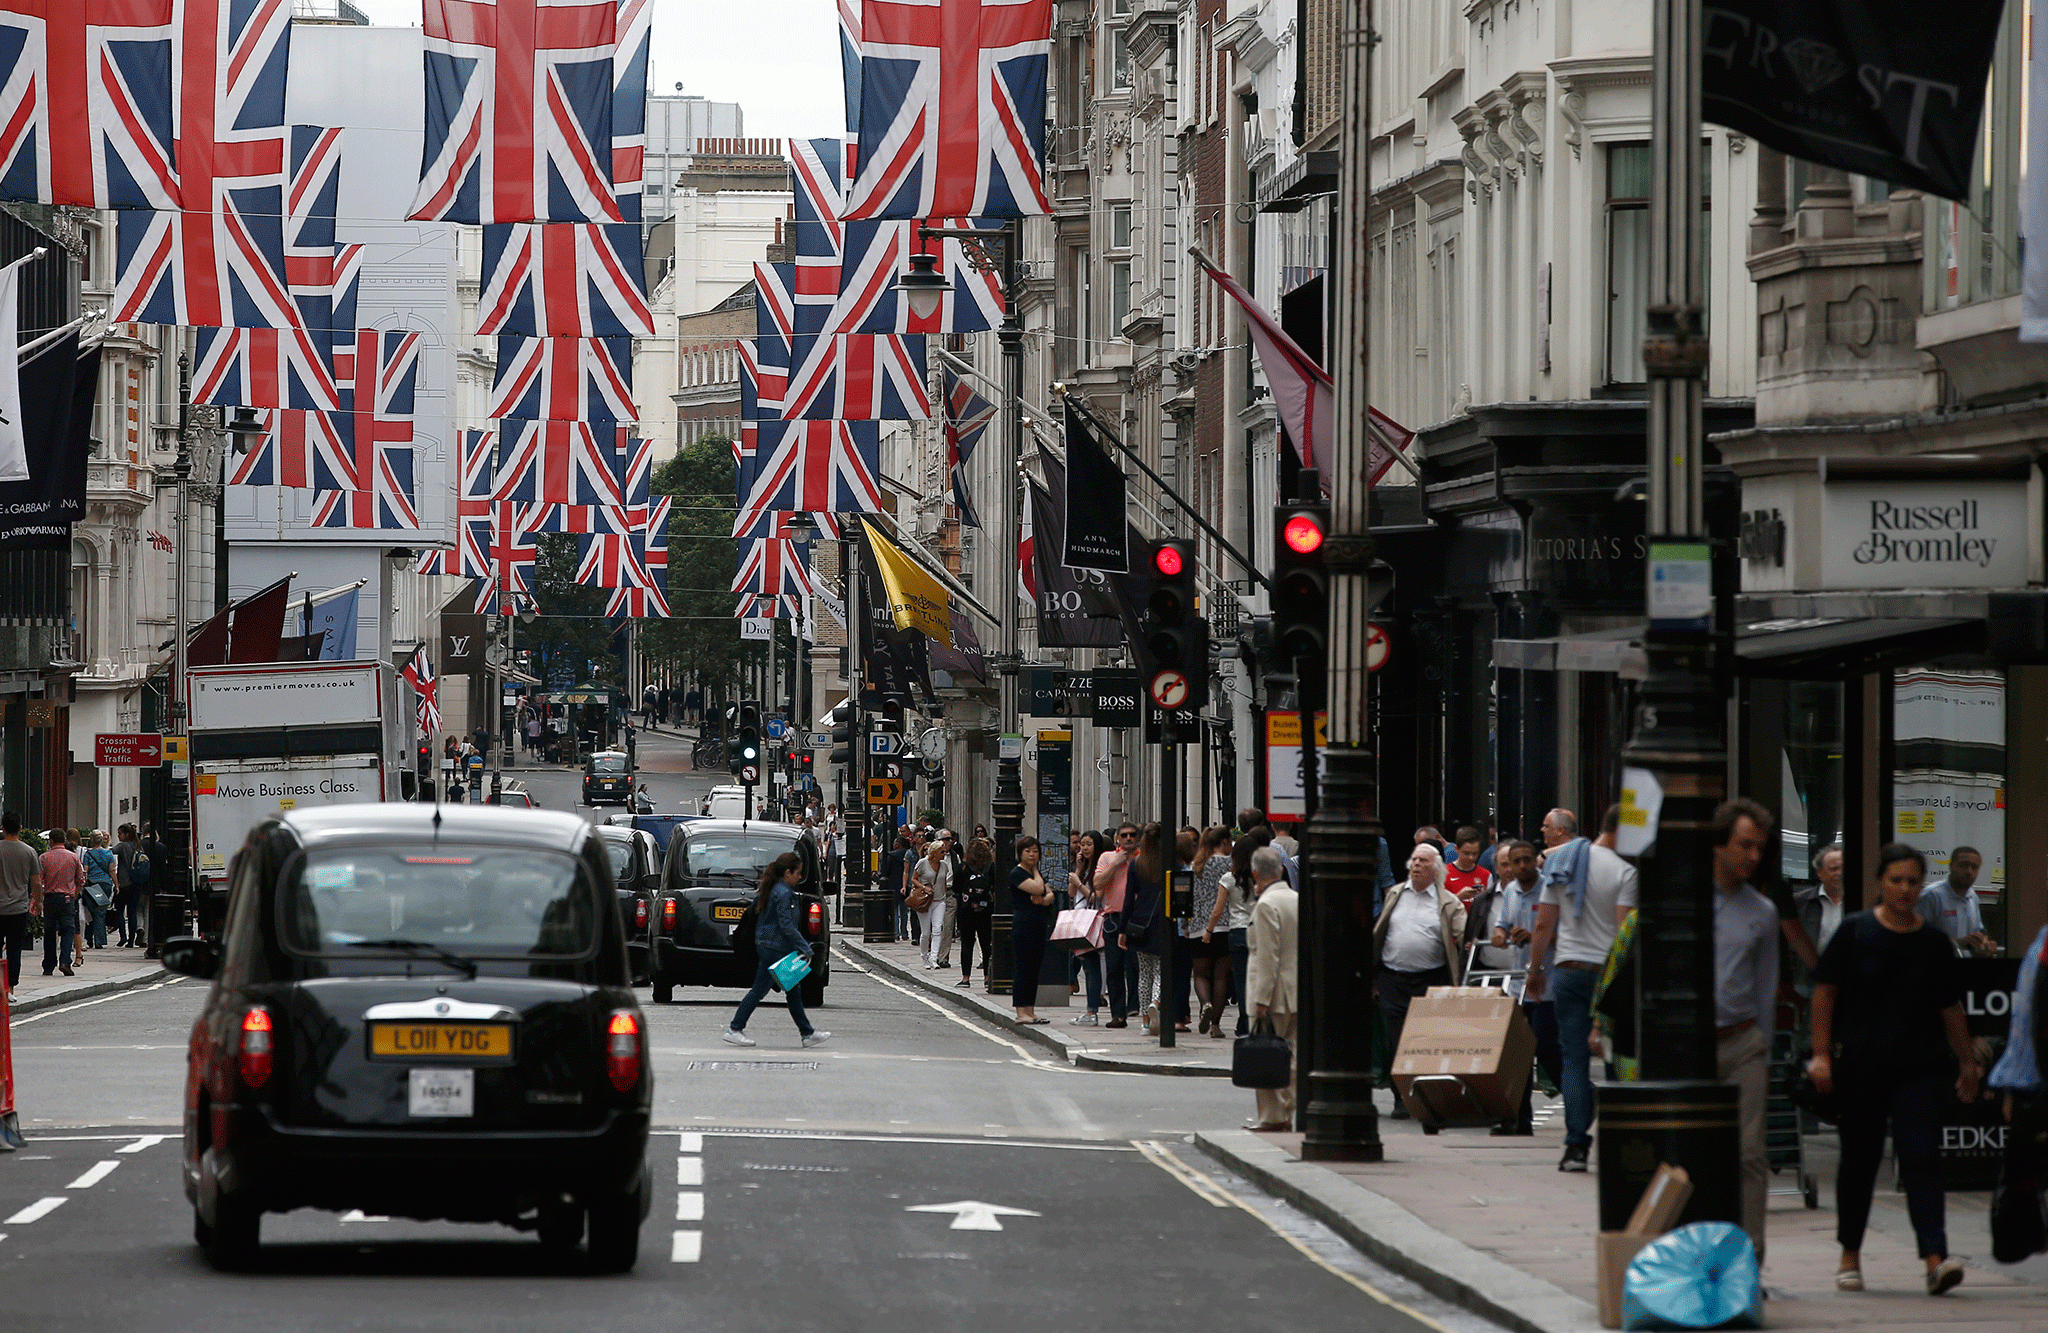 Although the economy is better than expected, Britons are gloomy over prospects